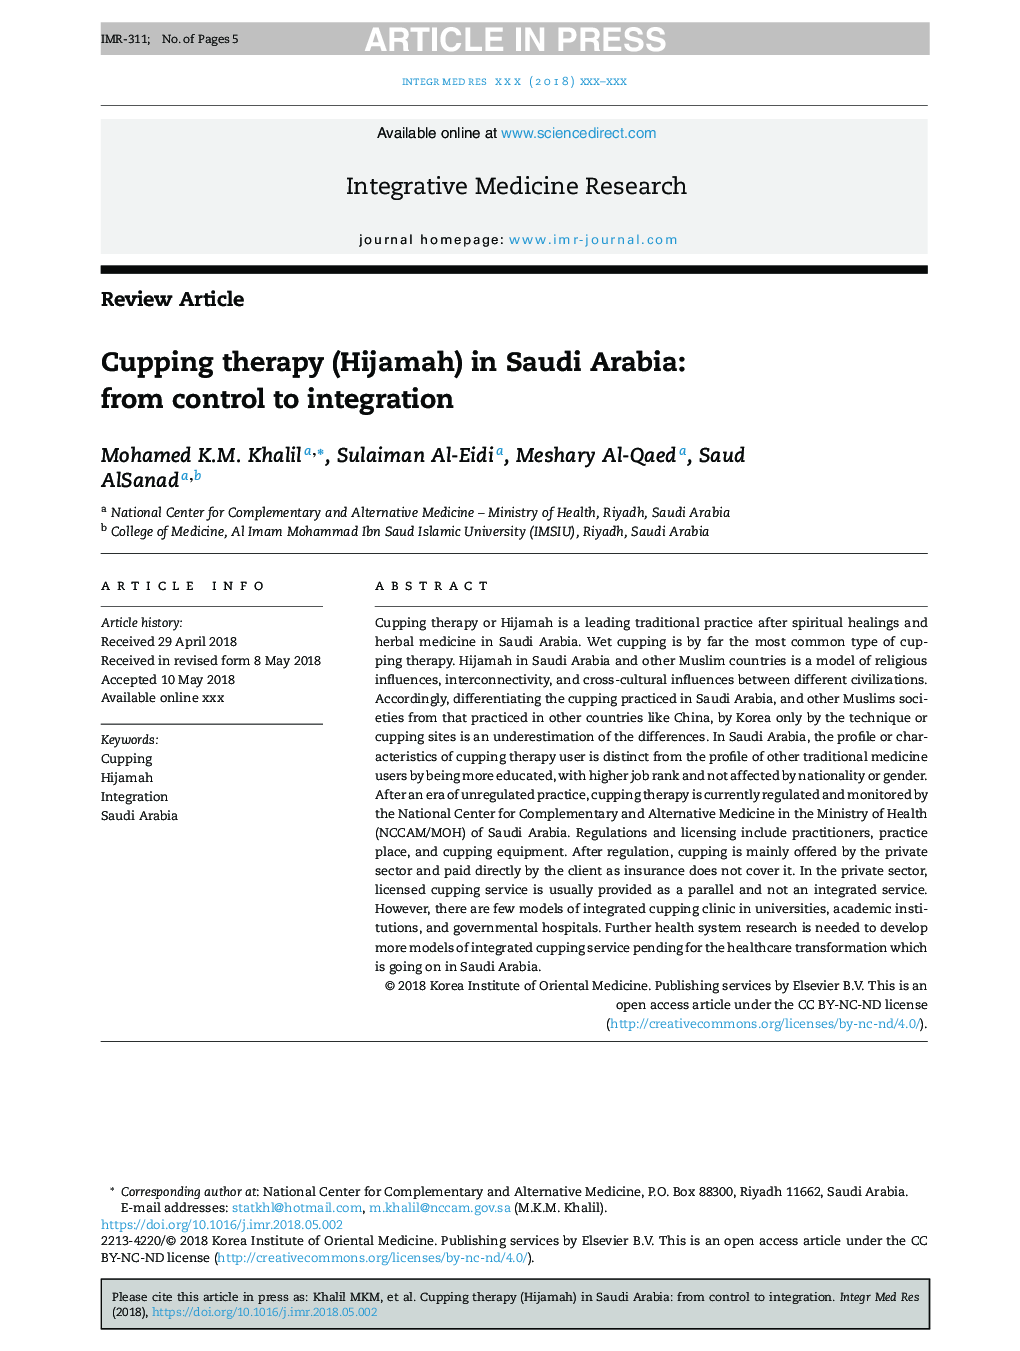 Cupping therapy in Saudi Arabia: from control to integration